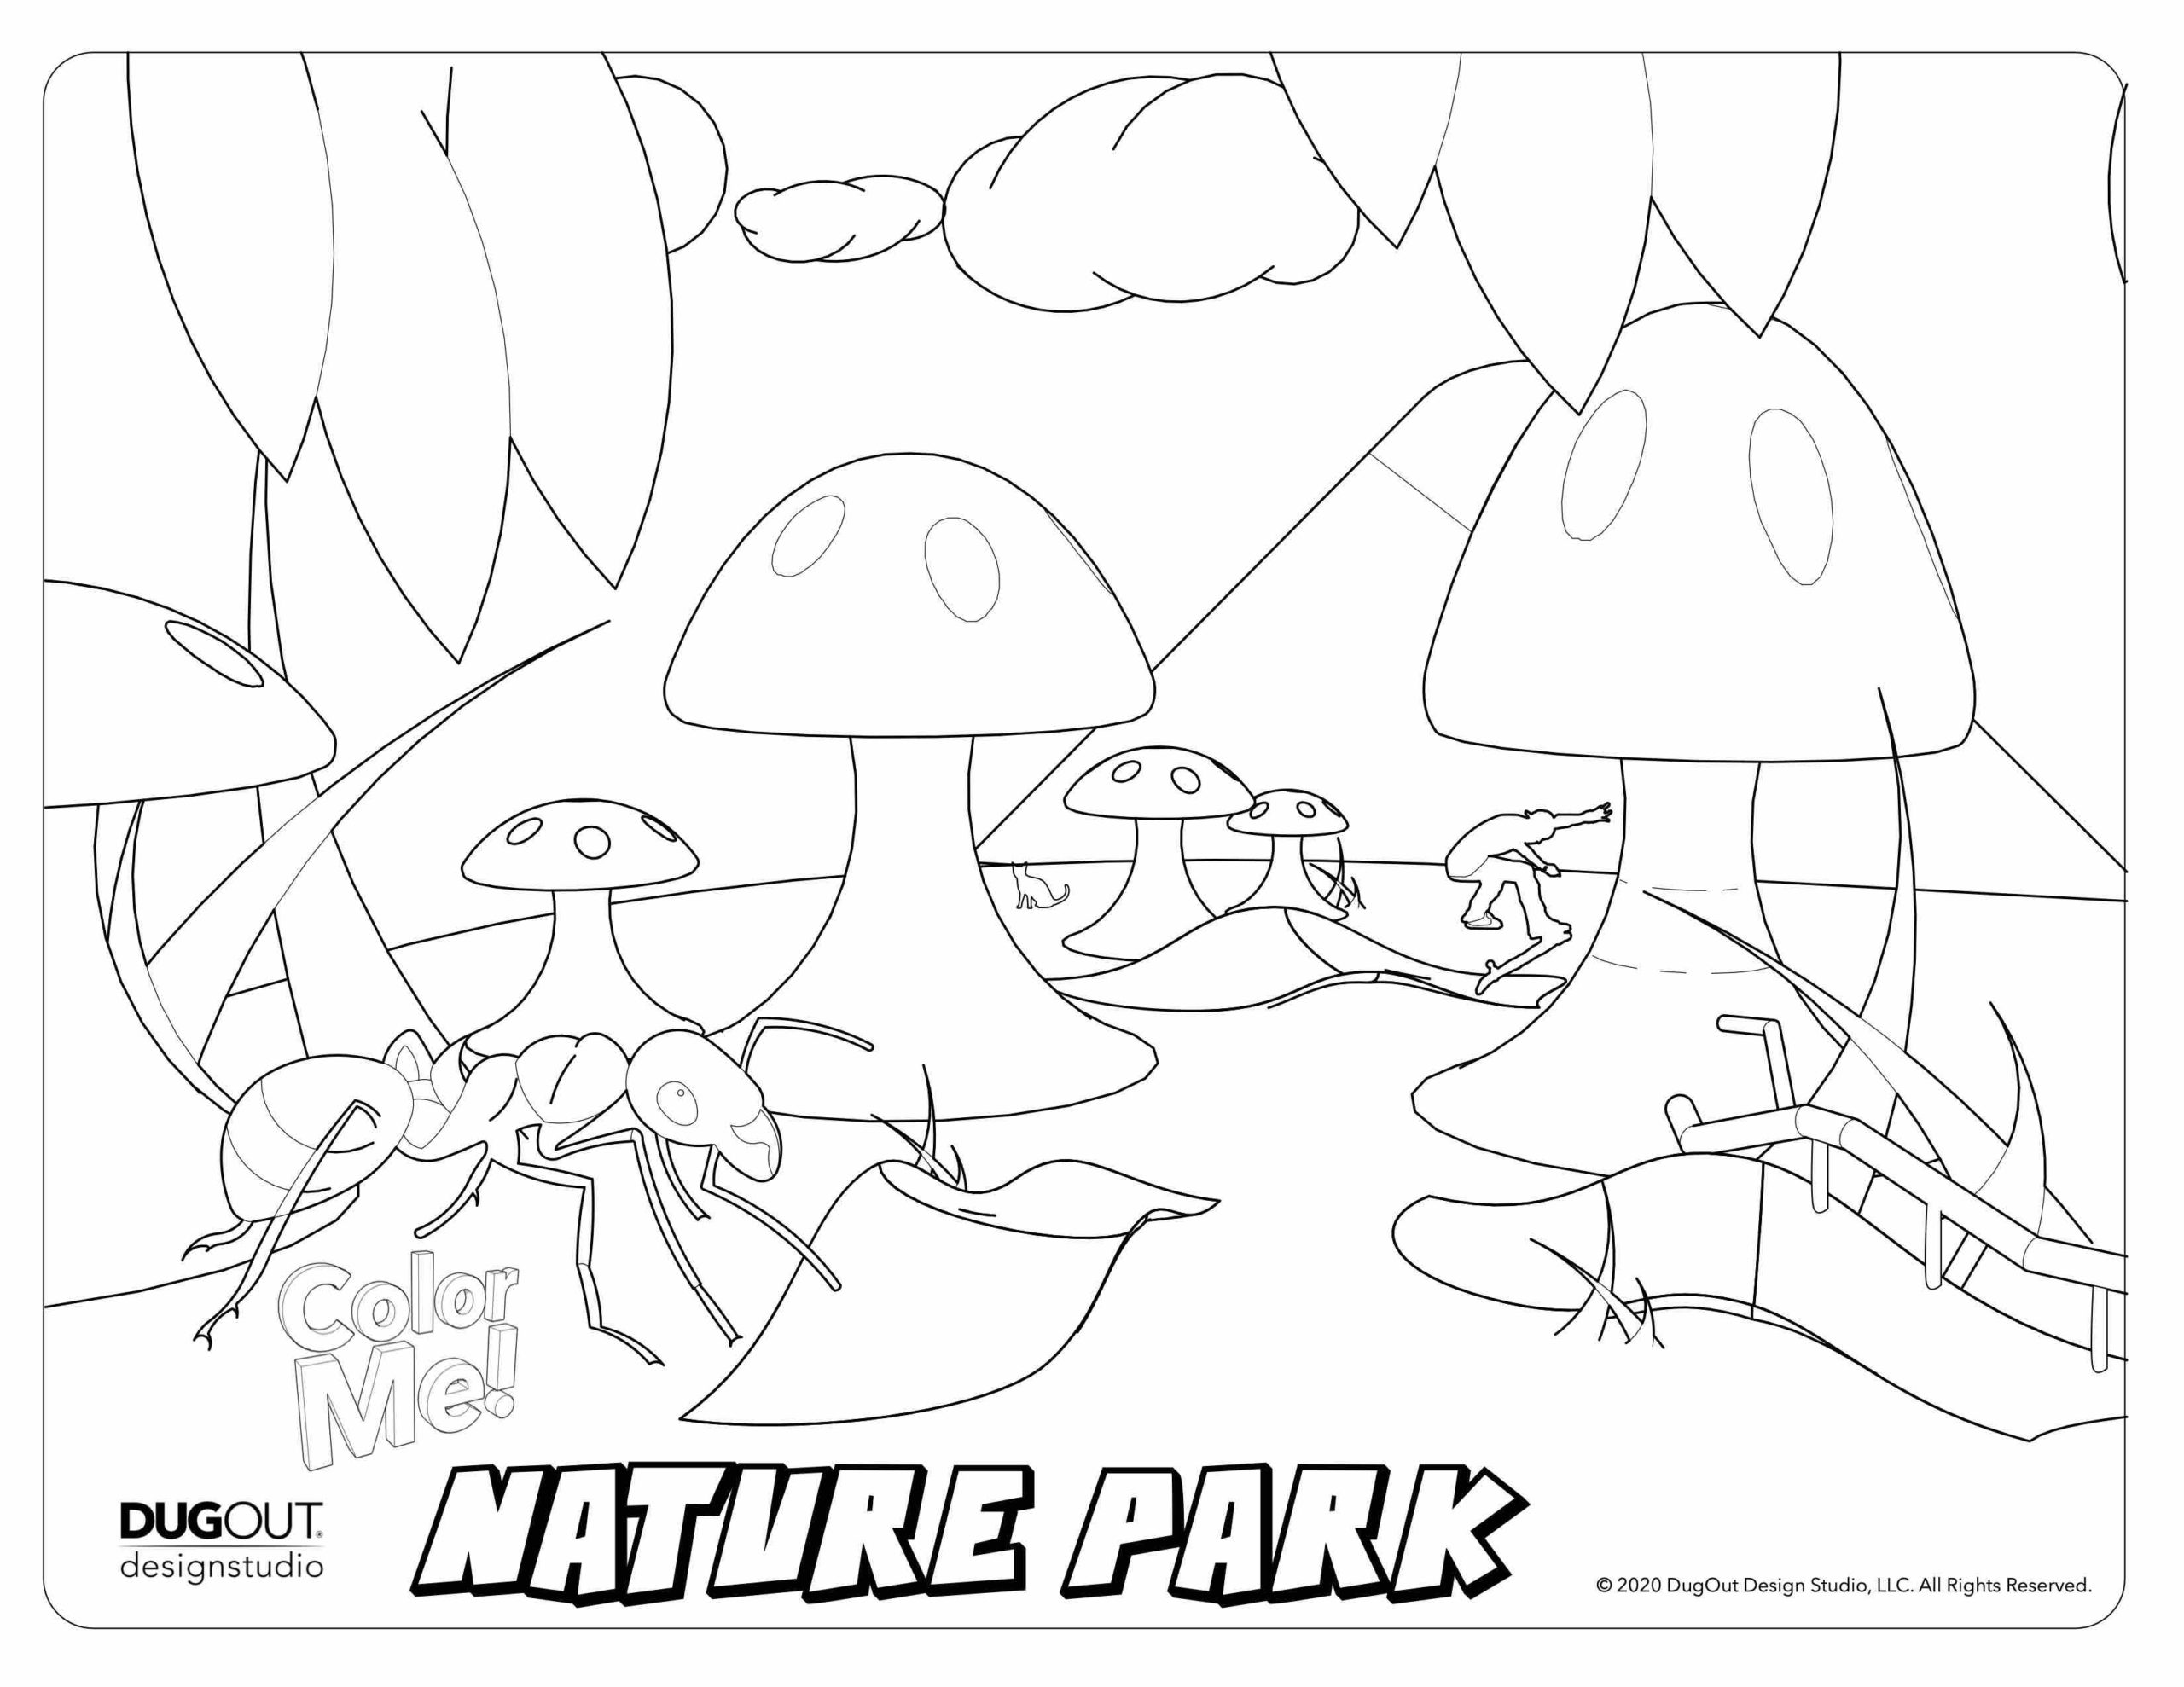 Nature park coloring page with large ant and mushrooms